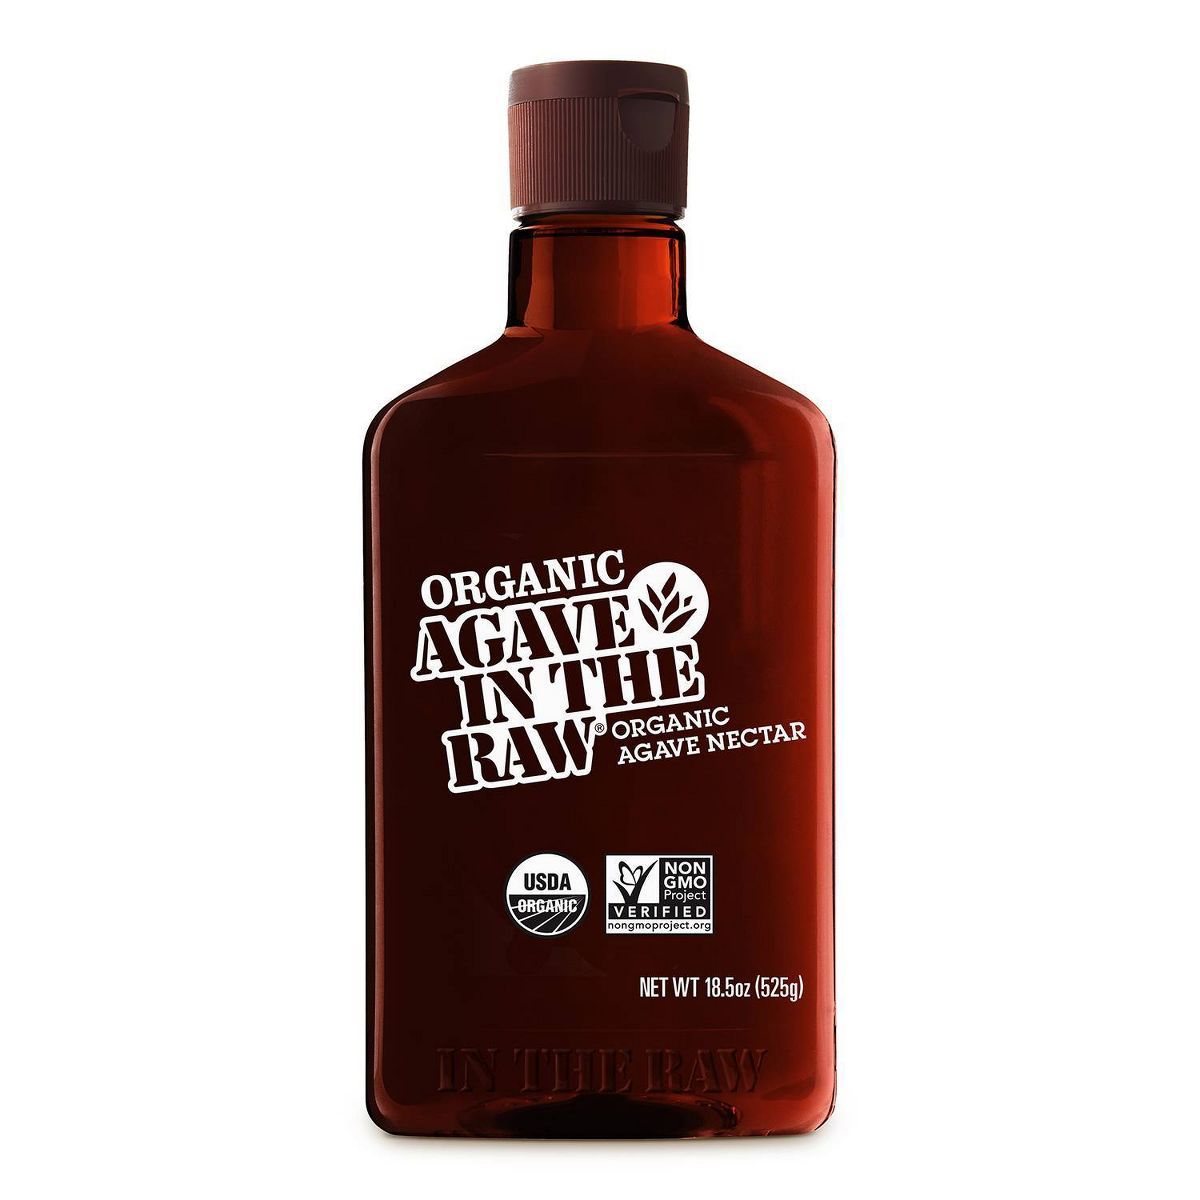 Organic Agave In The Raw Nectar - 18.5oz | Target